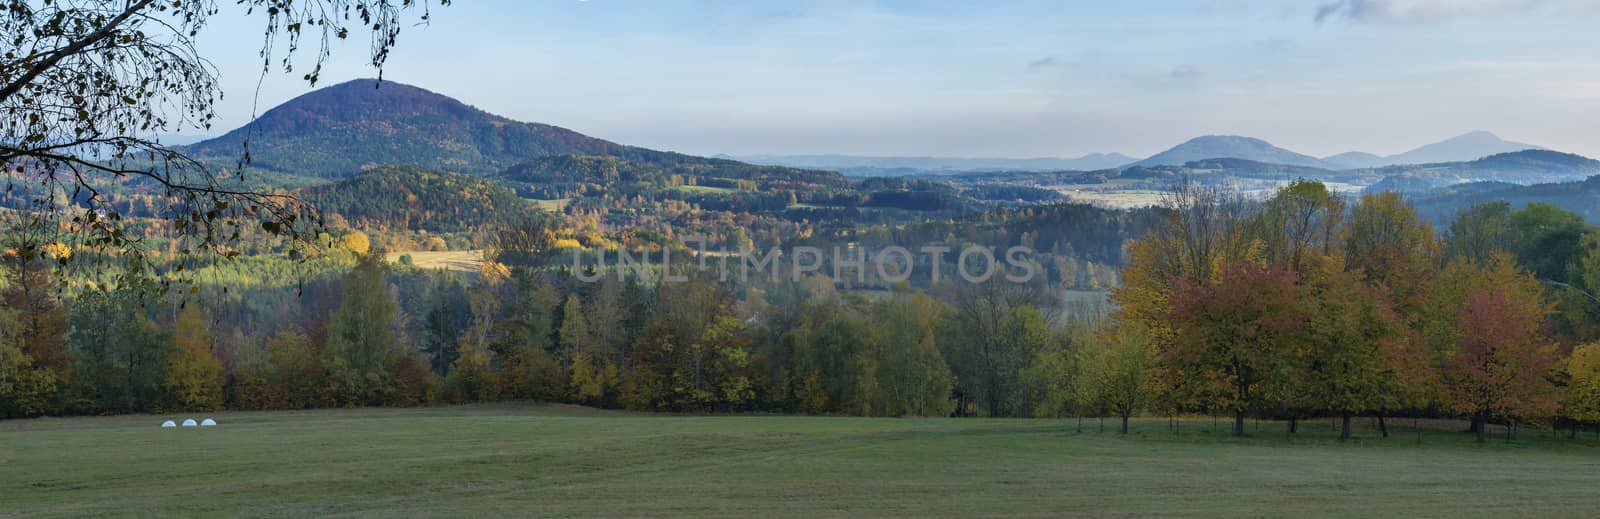 Panoramic Landscape in luzicke hory, Lusatian Mountains. Meadow, autumn colored deciduous and coniferous tree forest and green hills, blue sky background, golden hour by Henkeova